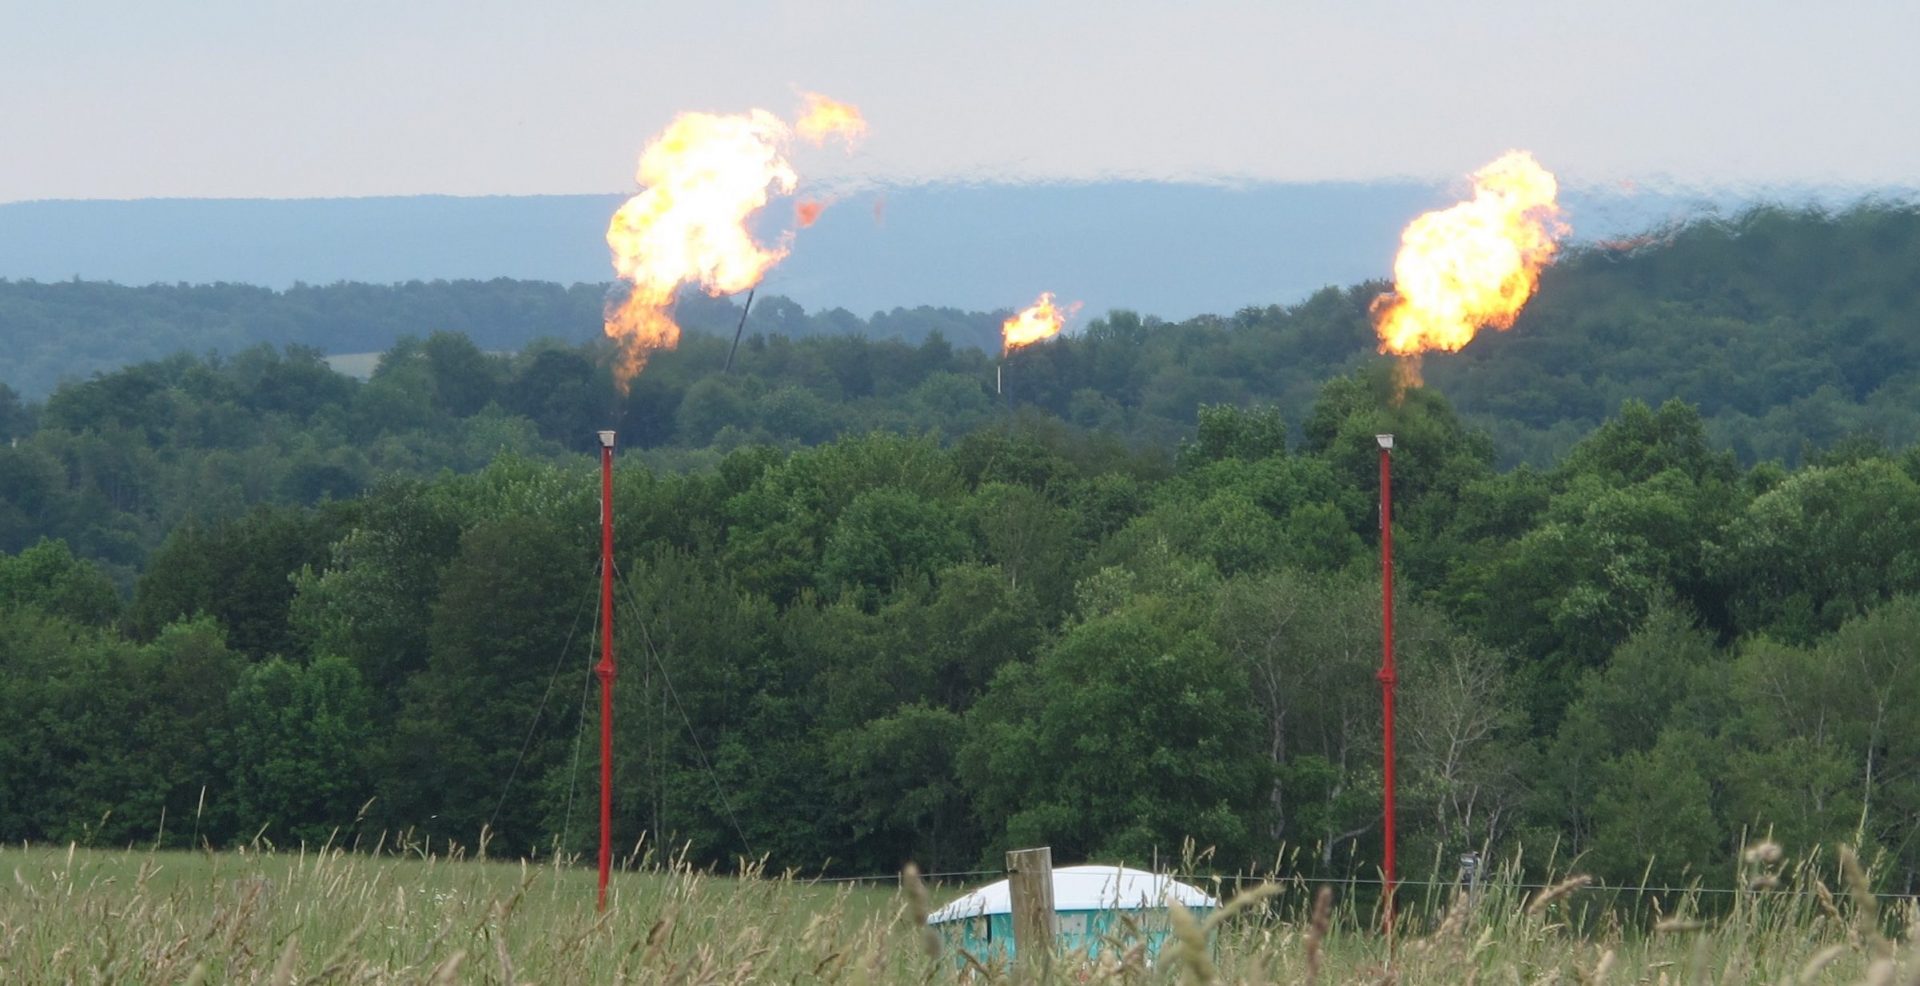 FILE PHOTO: Shell flared off natural gas for three months in 2012, to alleviate subsurface pressure in Union Township, Tioga County, where one of its drilling sites got too close to an abandoned well